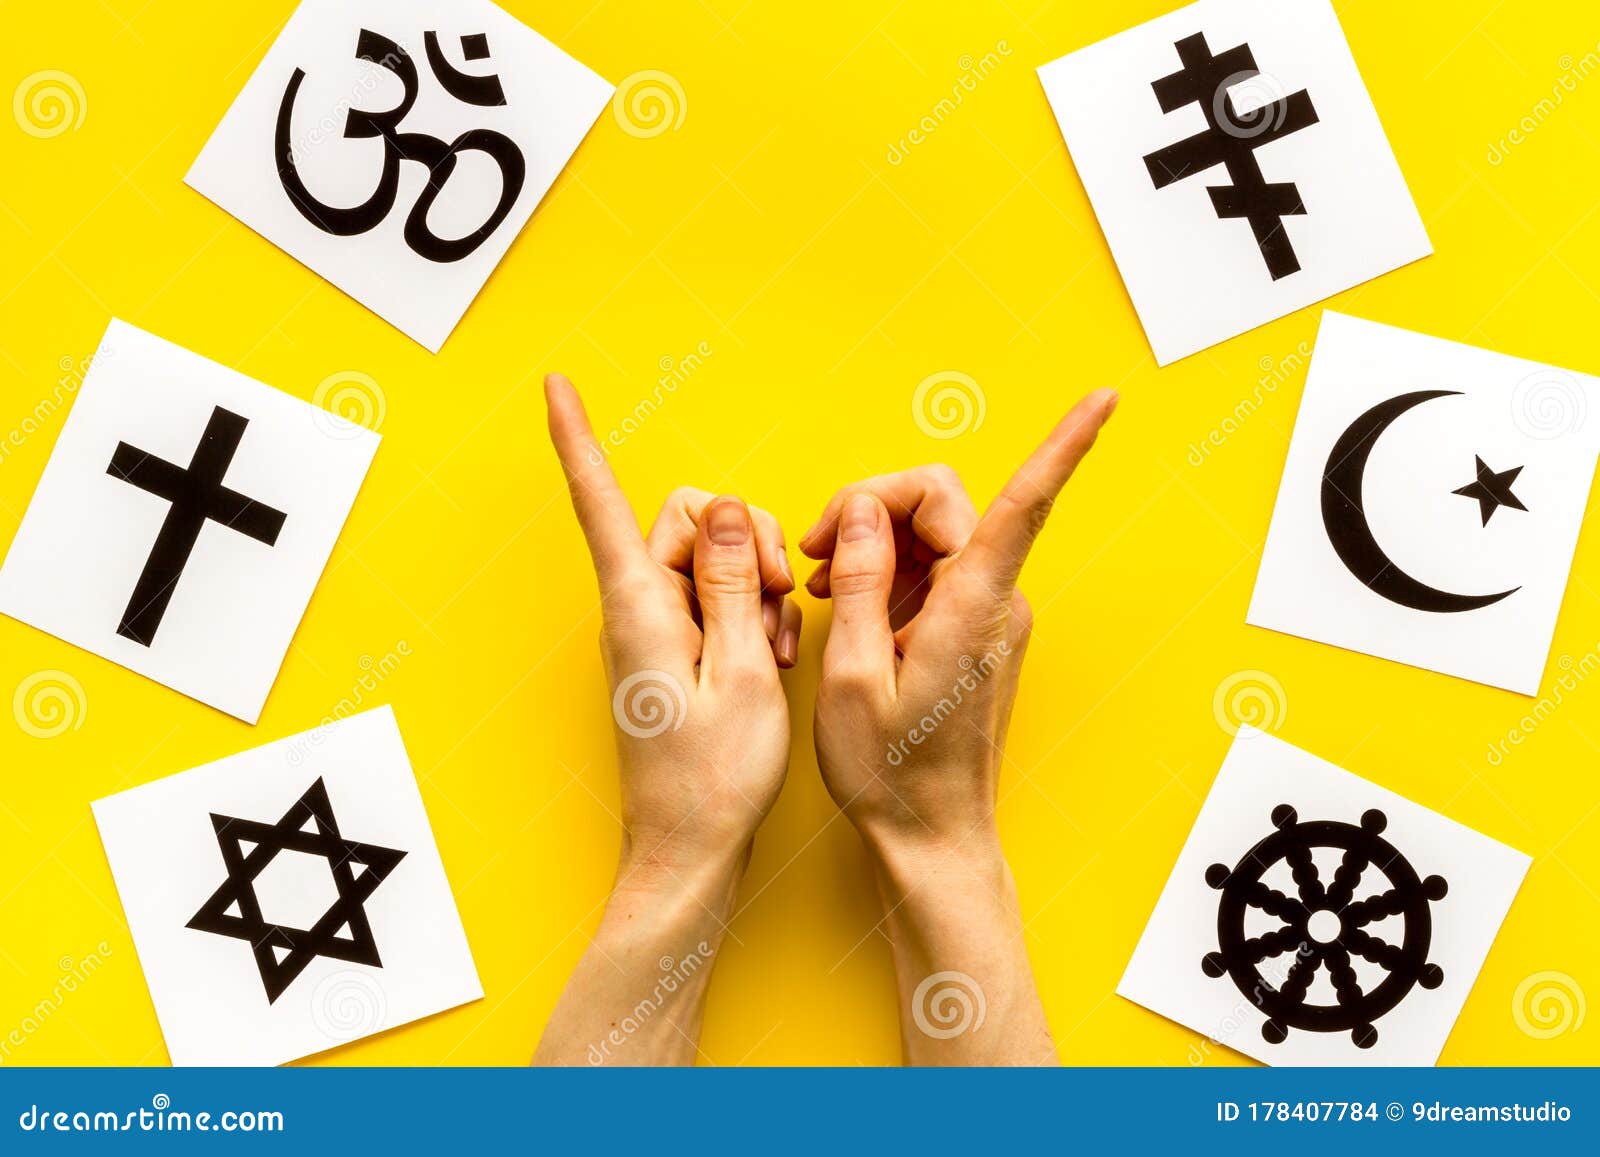 choose religions concept. hands point on christianity, catholicism, buddhism, judaism, islam s on yellow